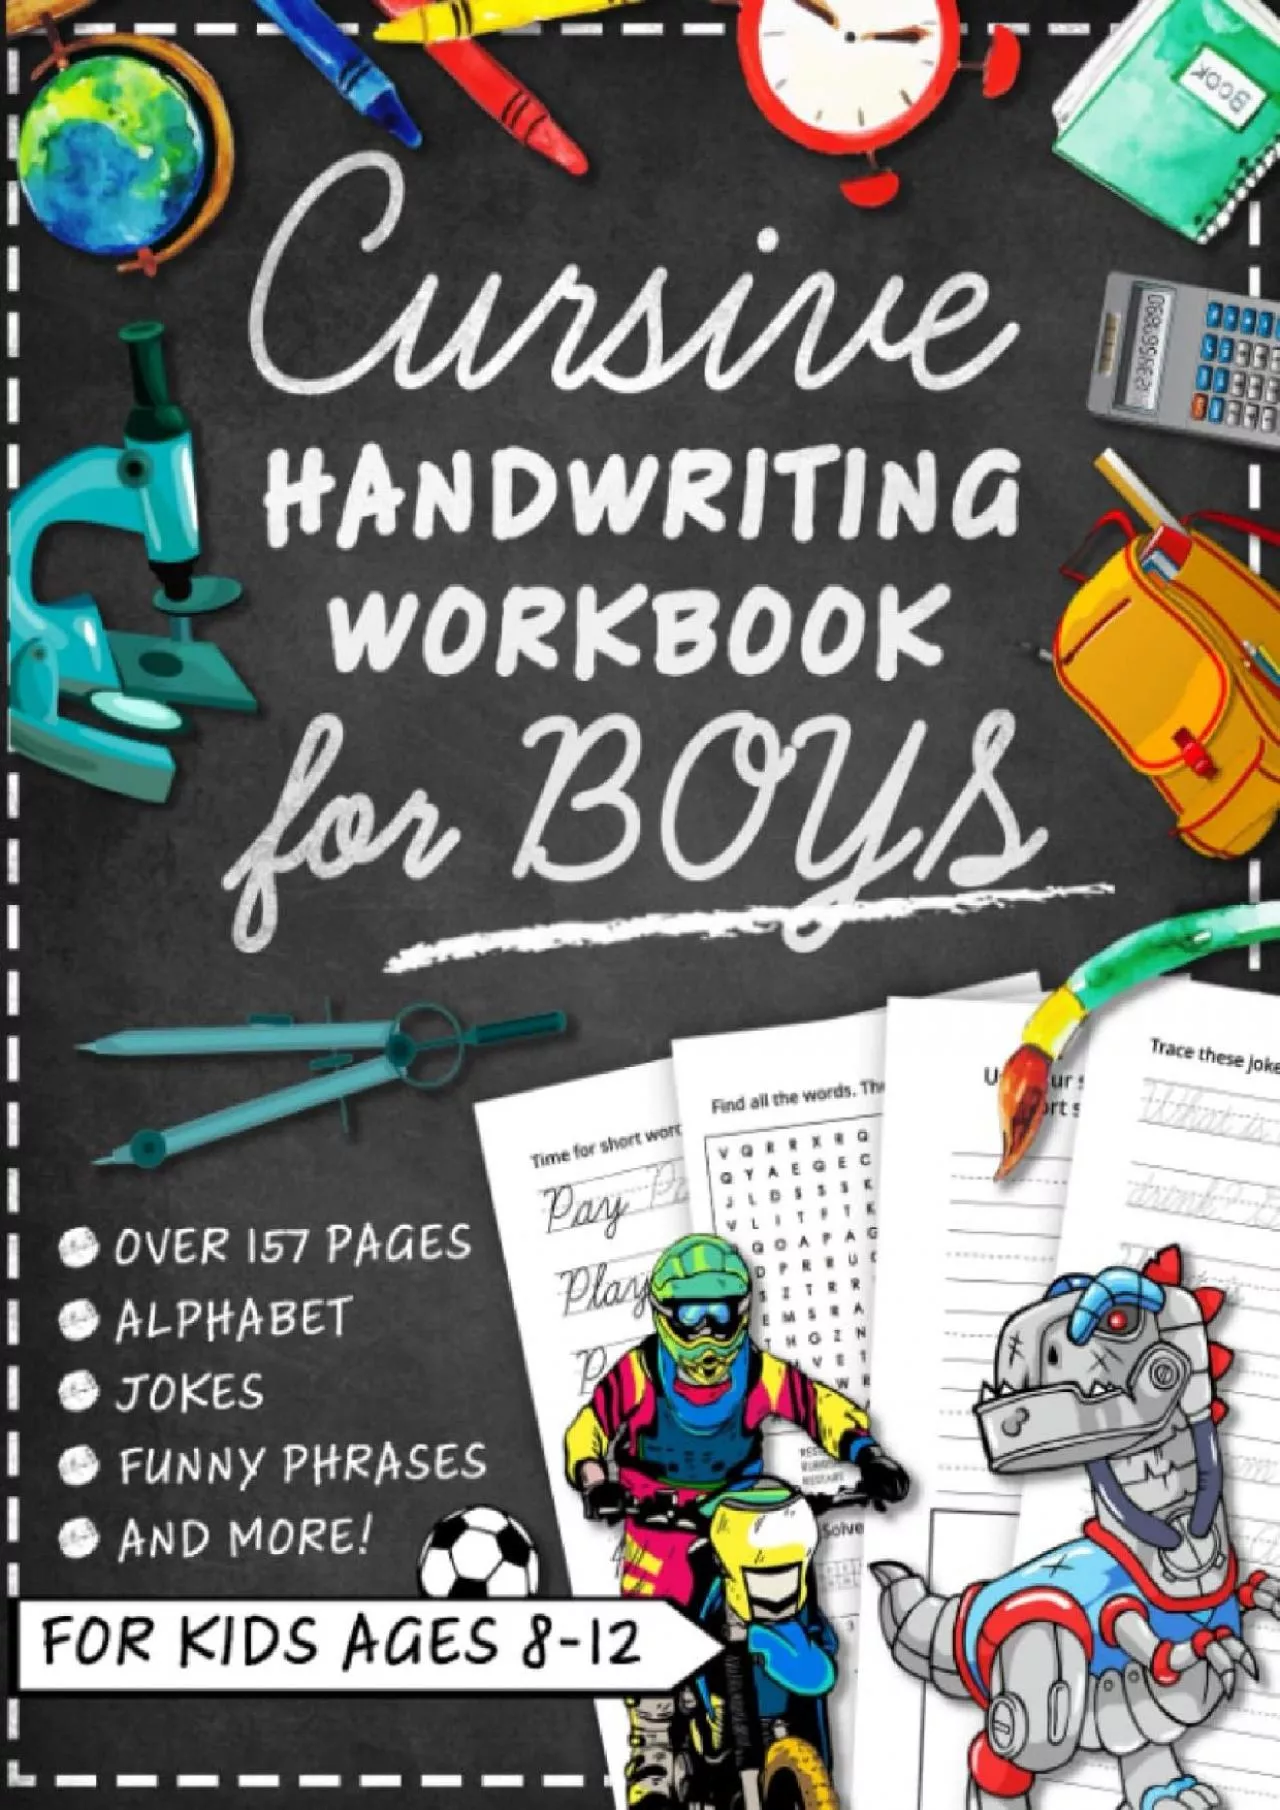 [DOWNLOAD] Cursive Handwriting Workbook for Kids Ages 8-12 with Jokes  Riddles for Boys: